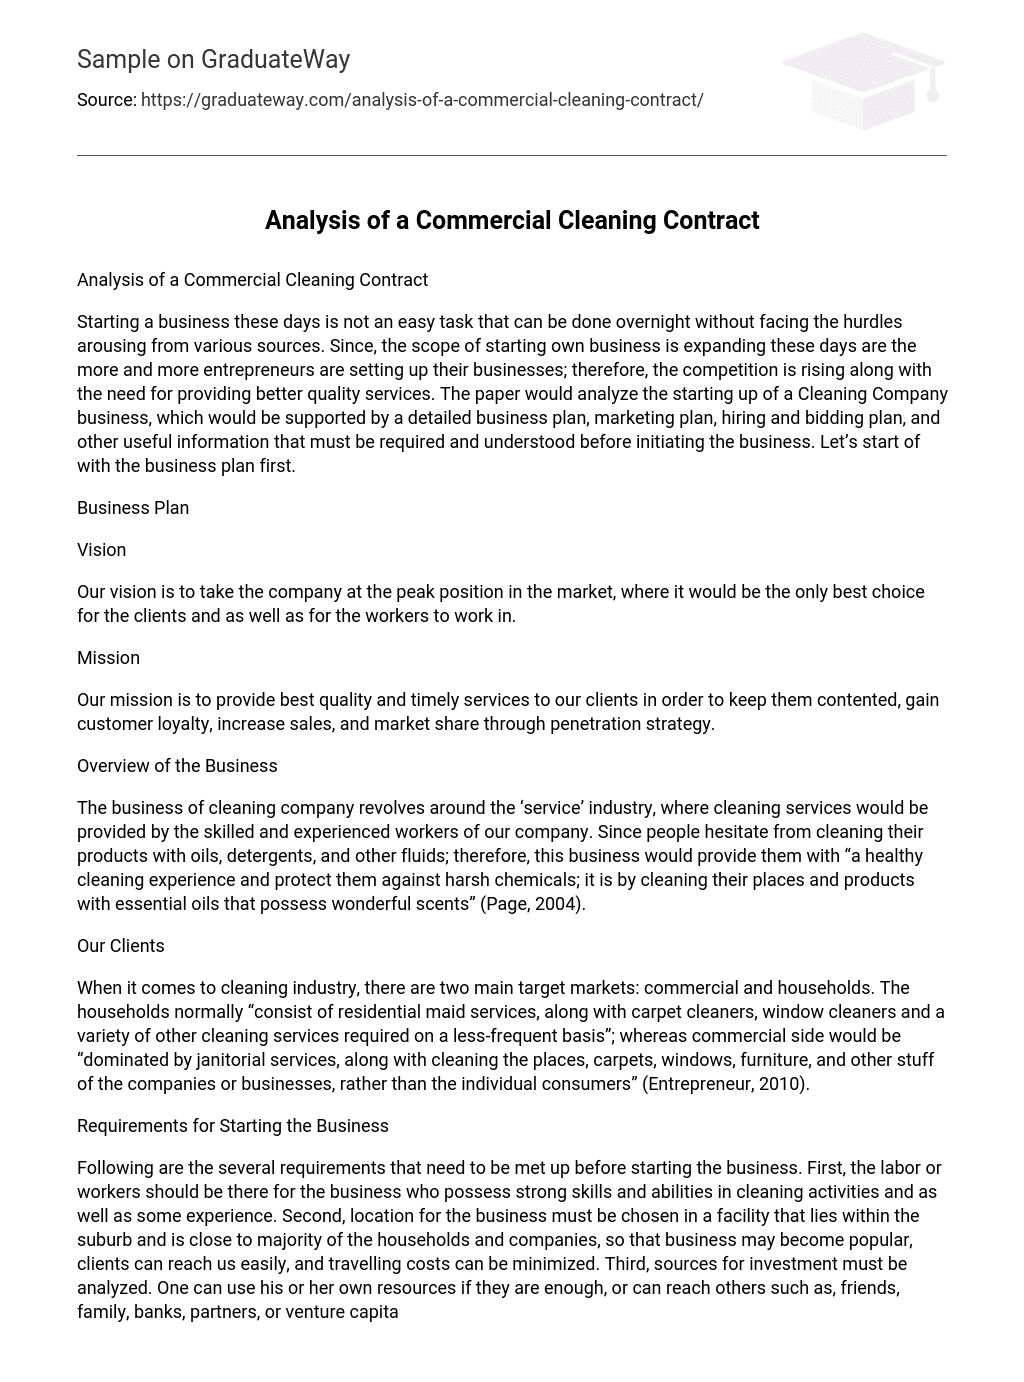 Analysis of a Commercial Cleaning Contract